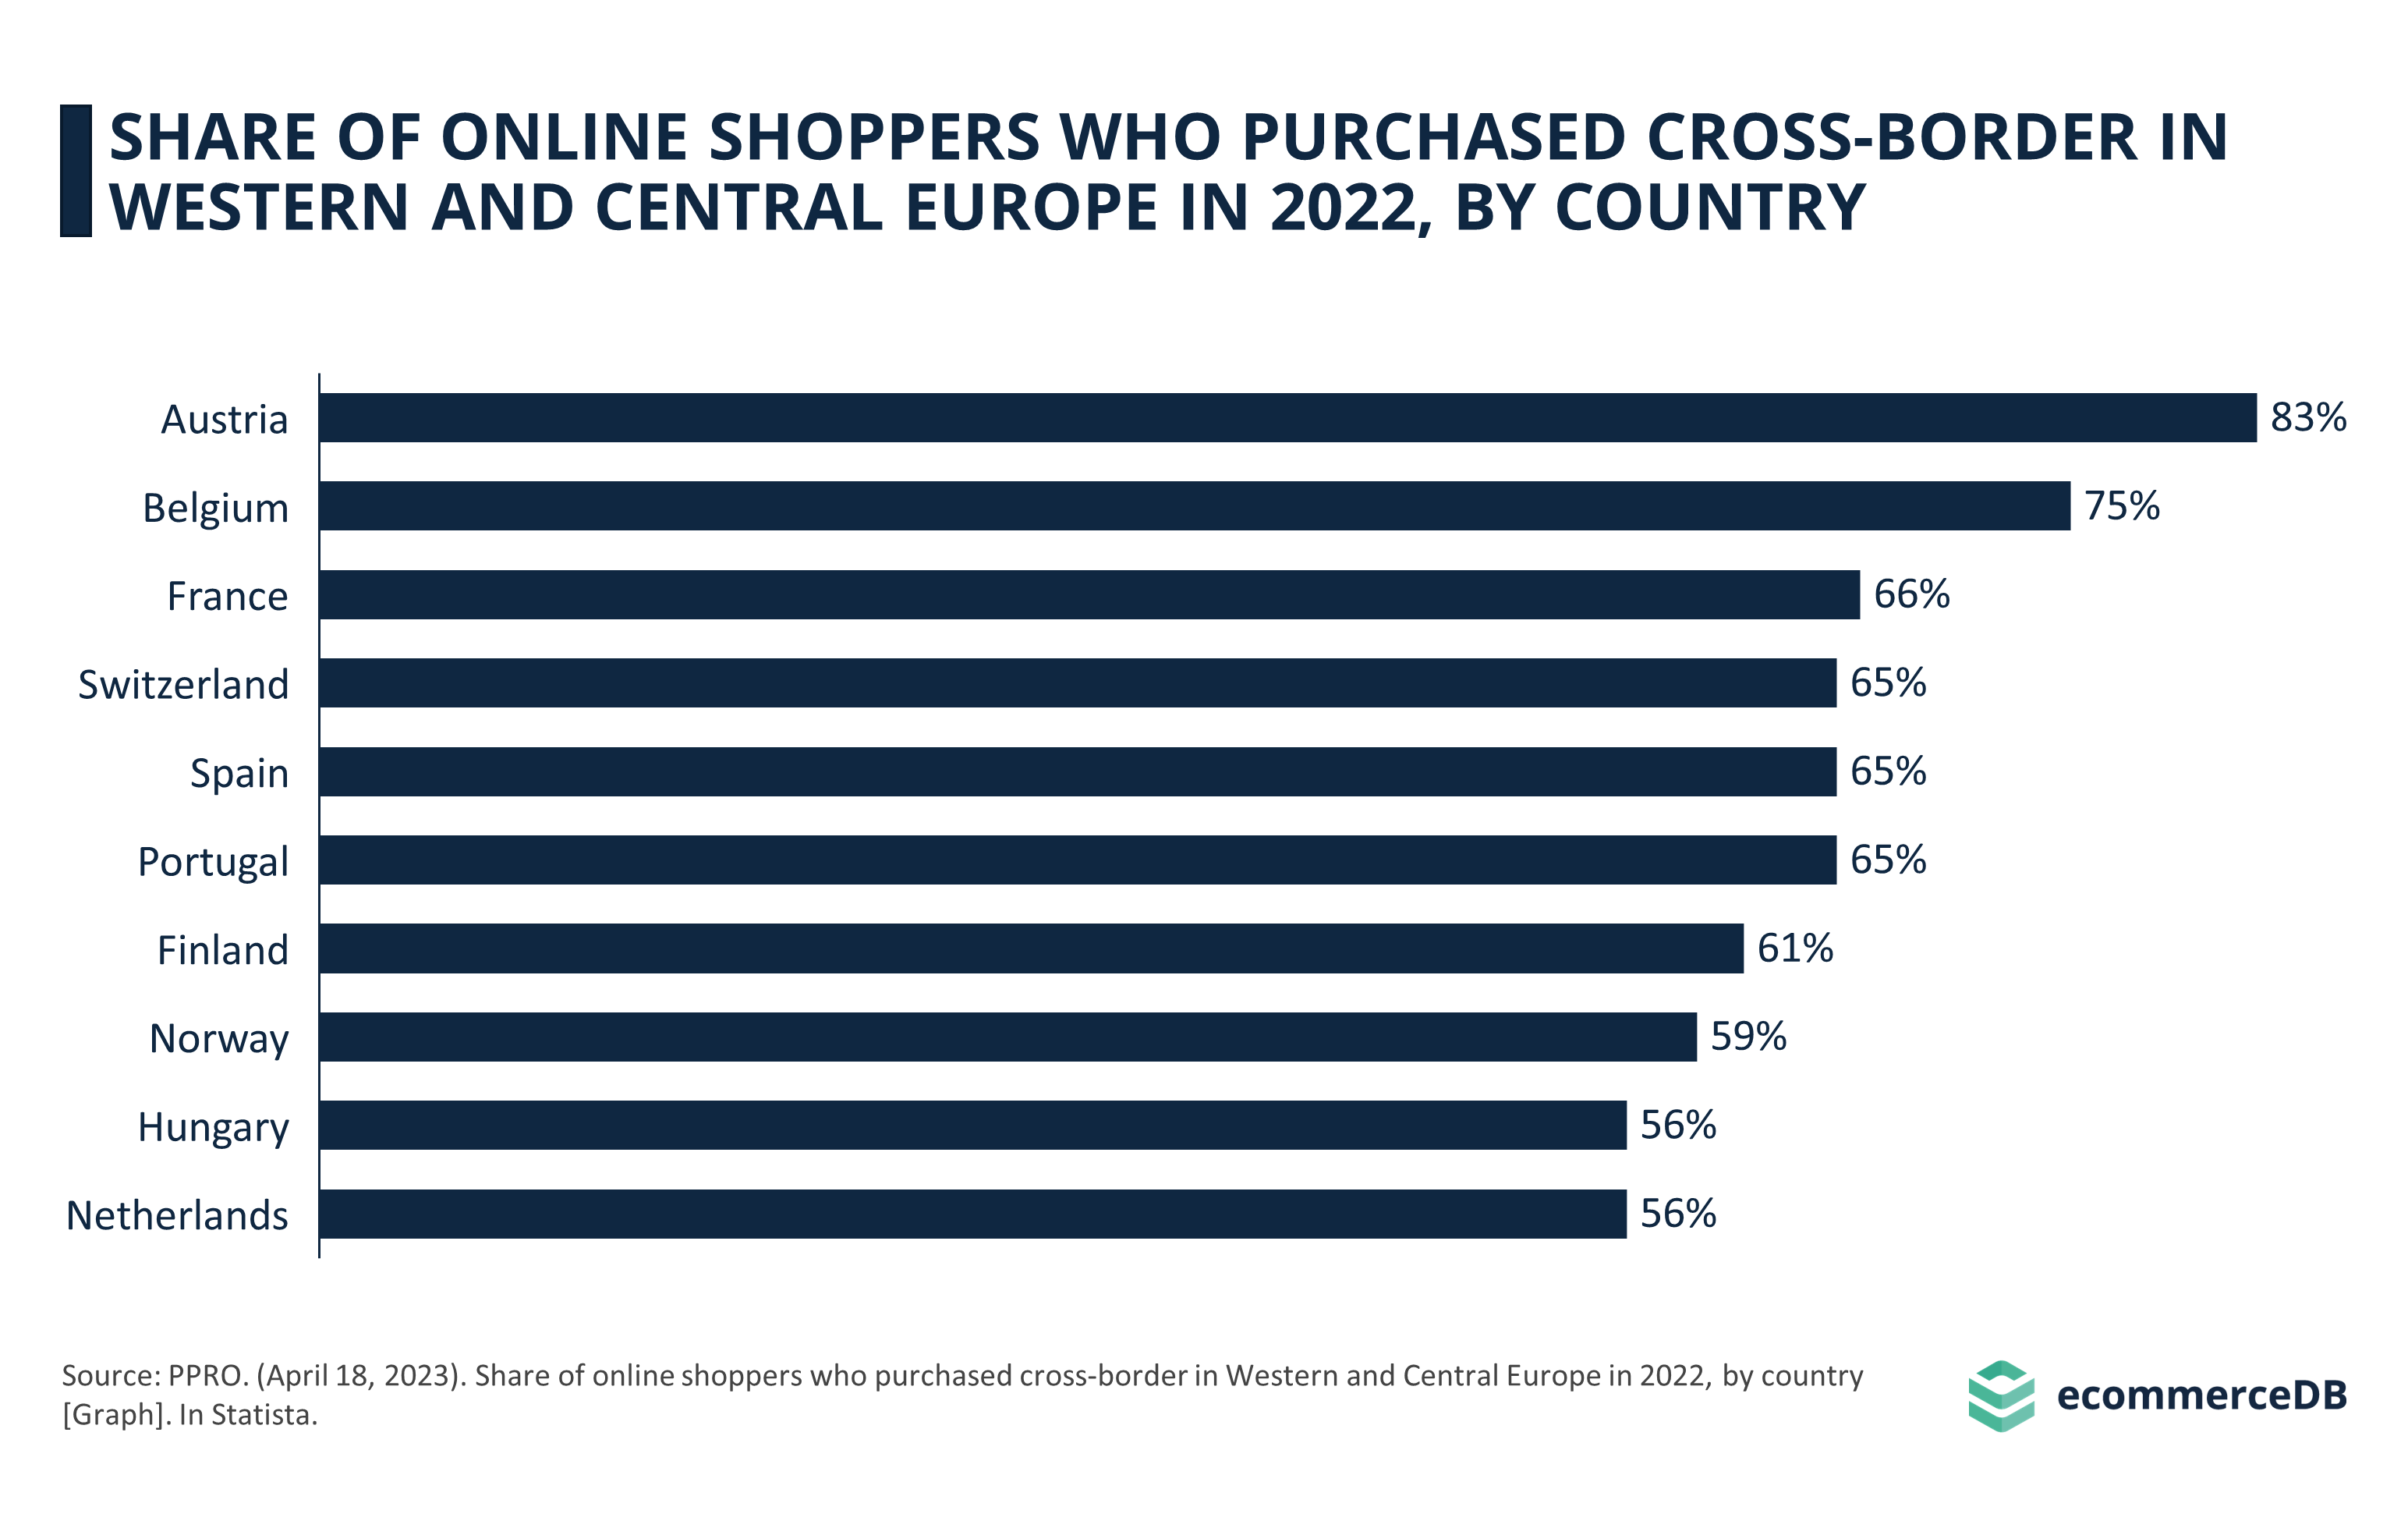 SHARE OF ONLINE SHOPPERS WHO PURCHASED CROSS-BORDER IN WESTERN AND CENTRAL EUROPE IN 2022, BY COUNTRY